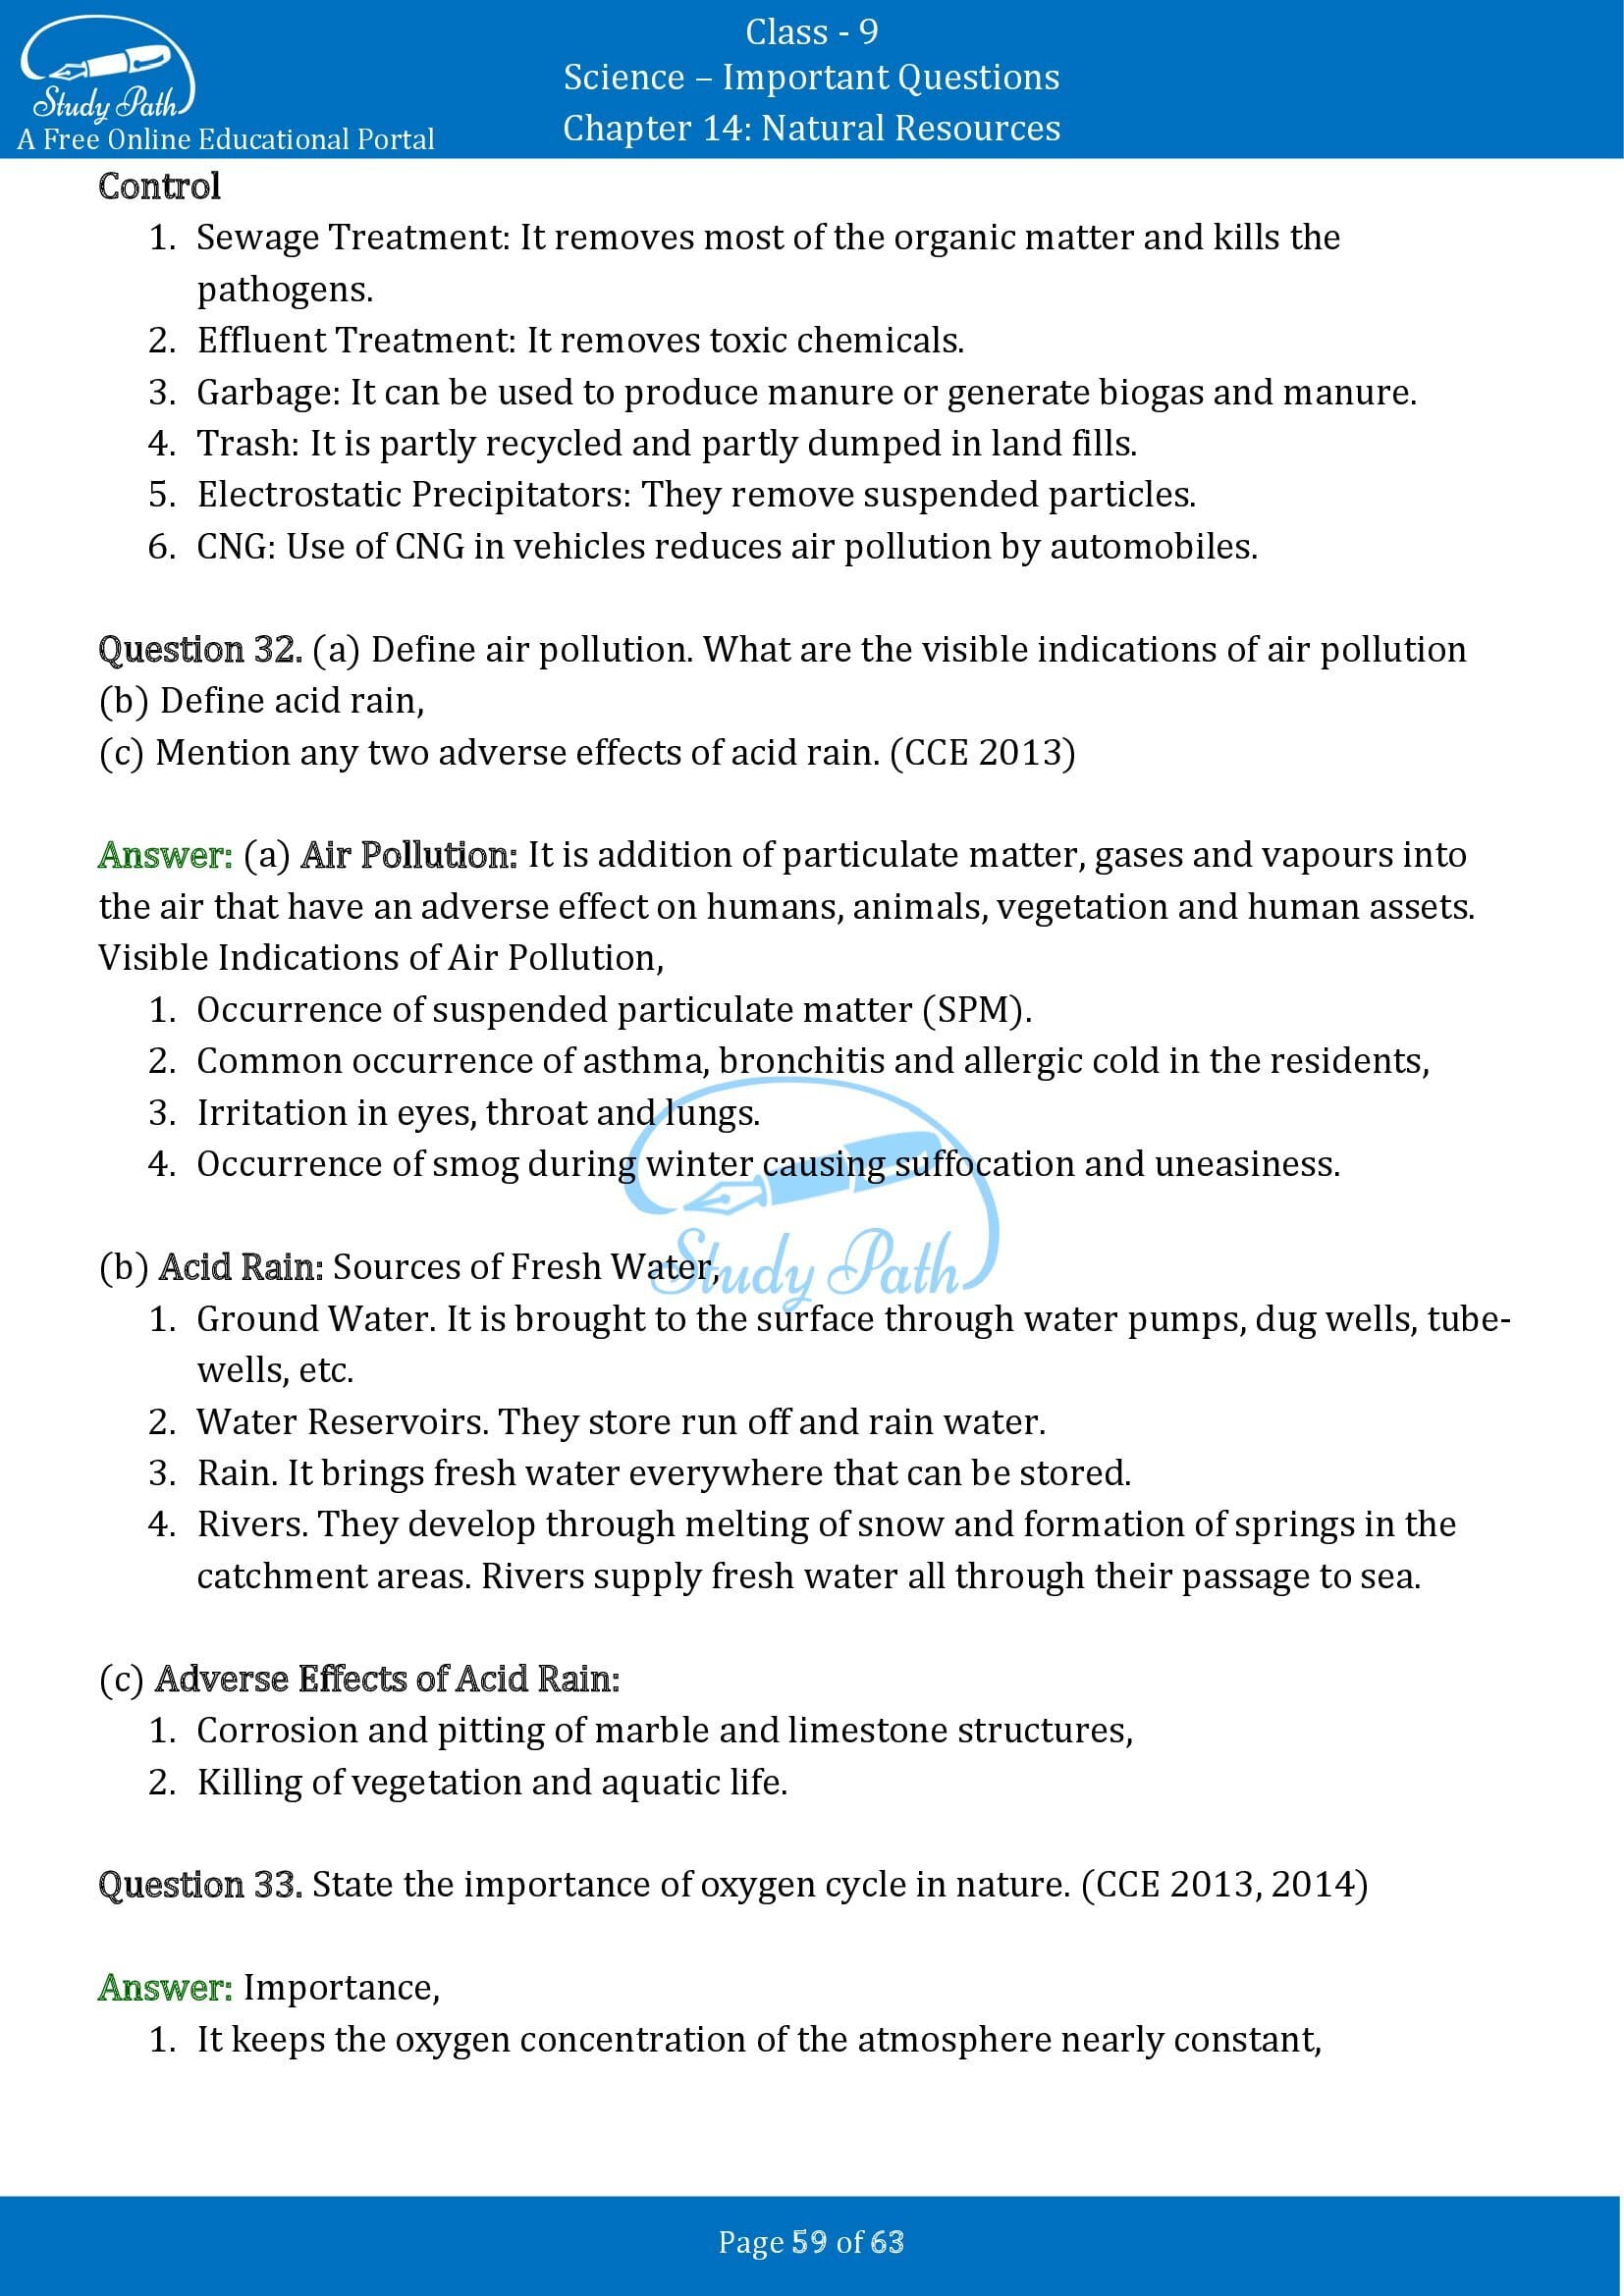 Important Questions for Class 9 Science Chapter 14 Natural Resources 00059